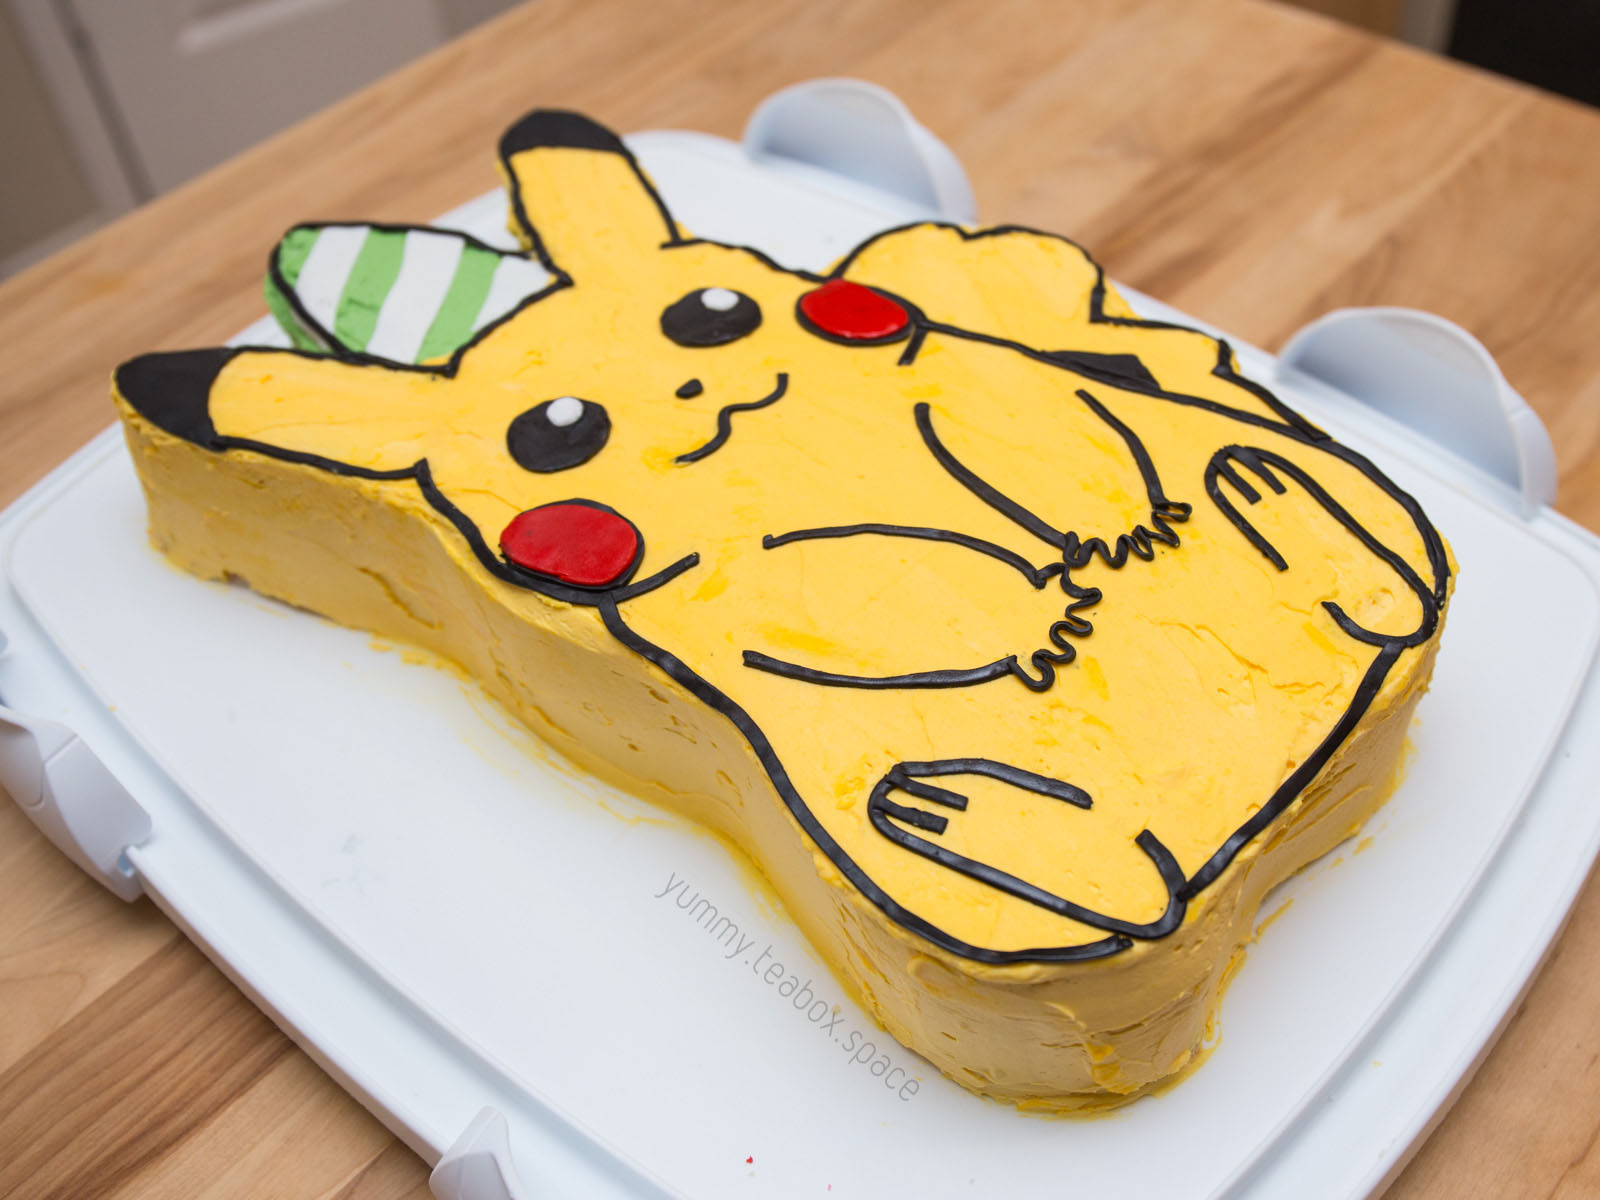 Cake that looks like a sitting Pikachu with a party hat.